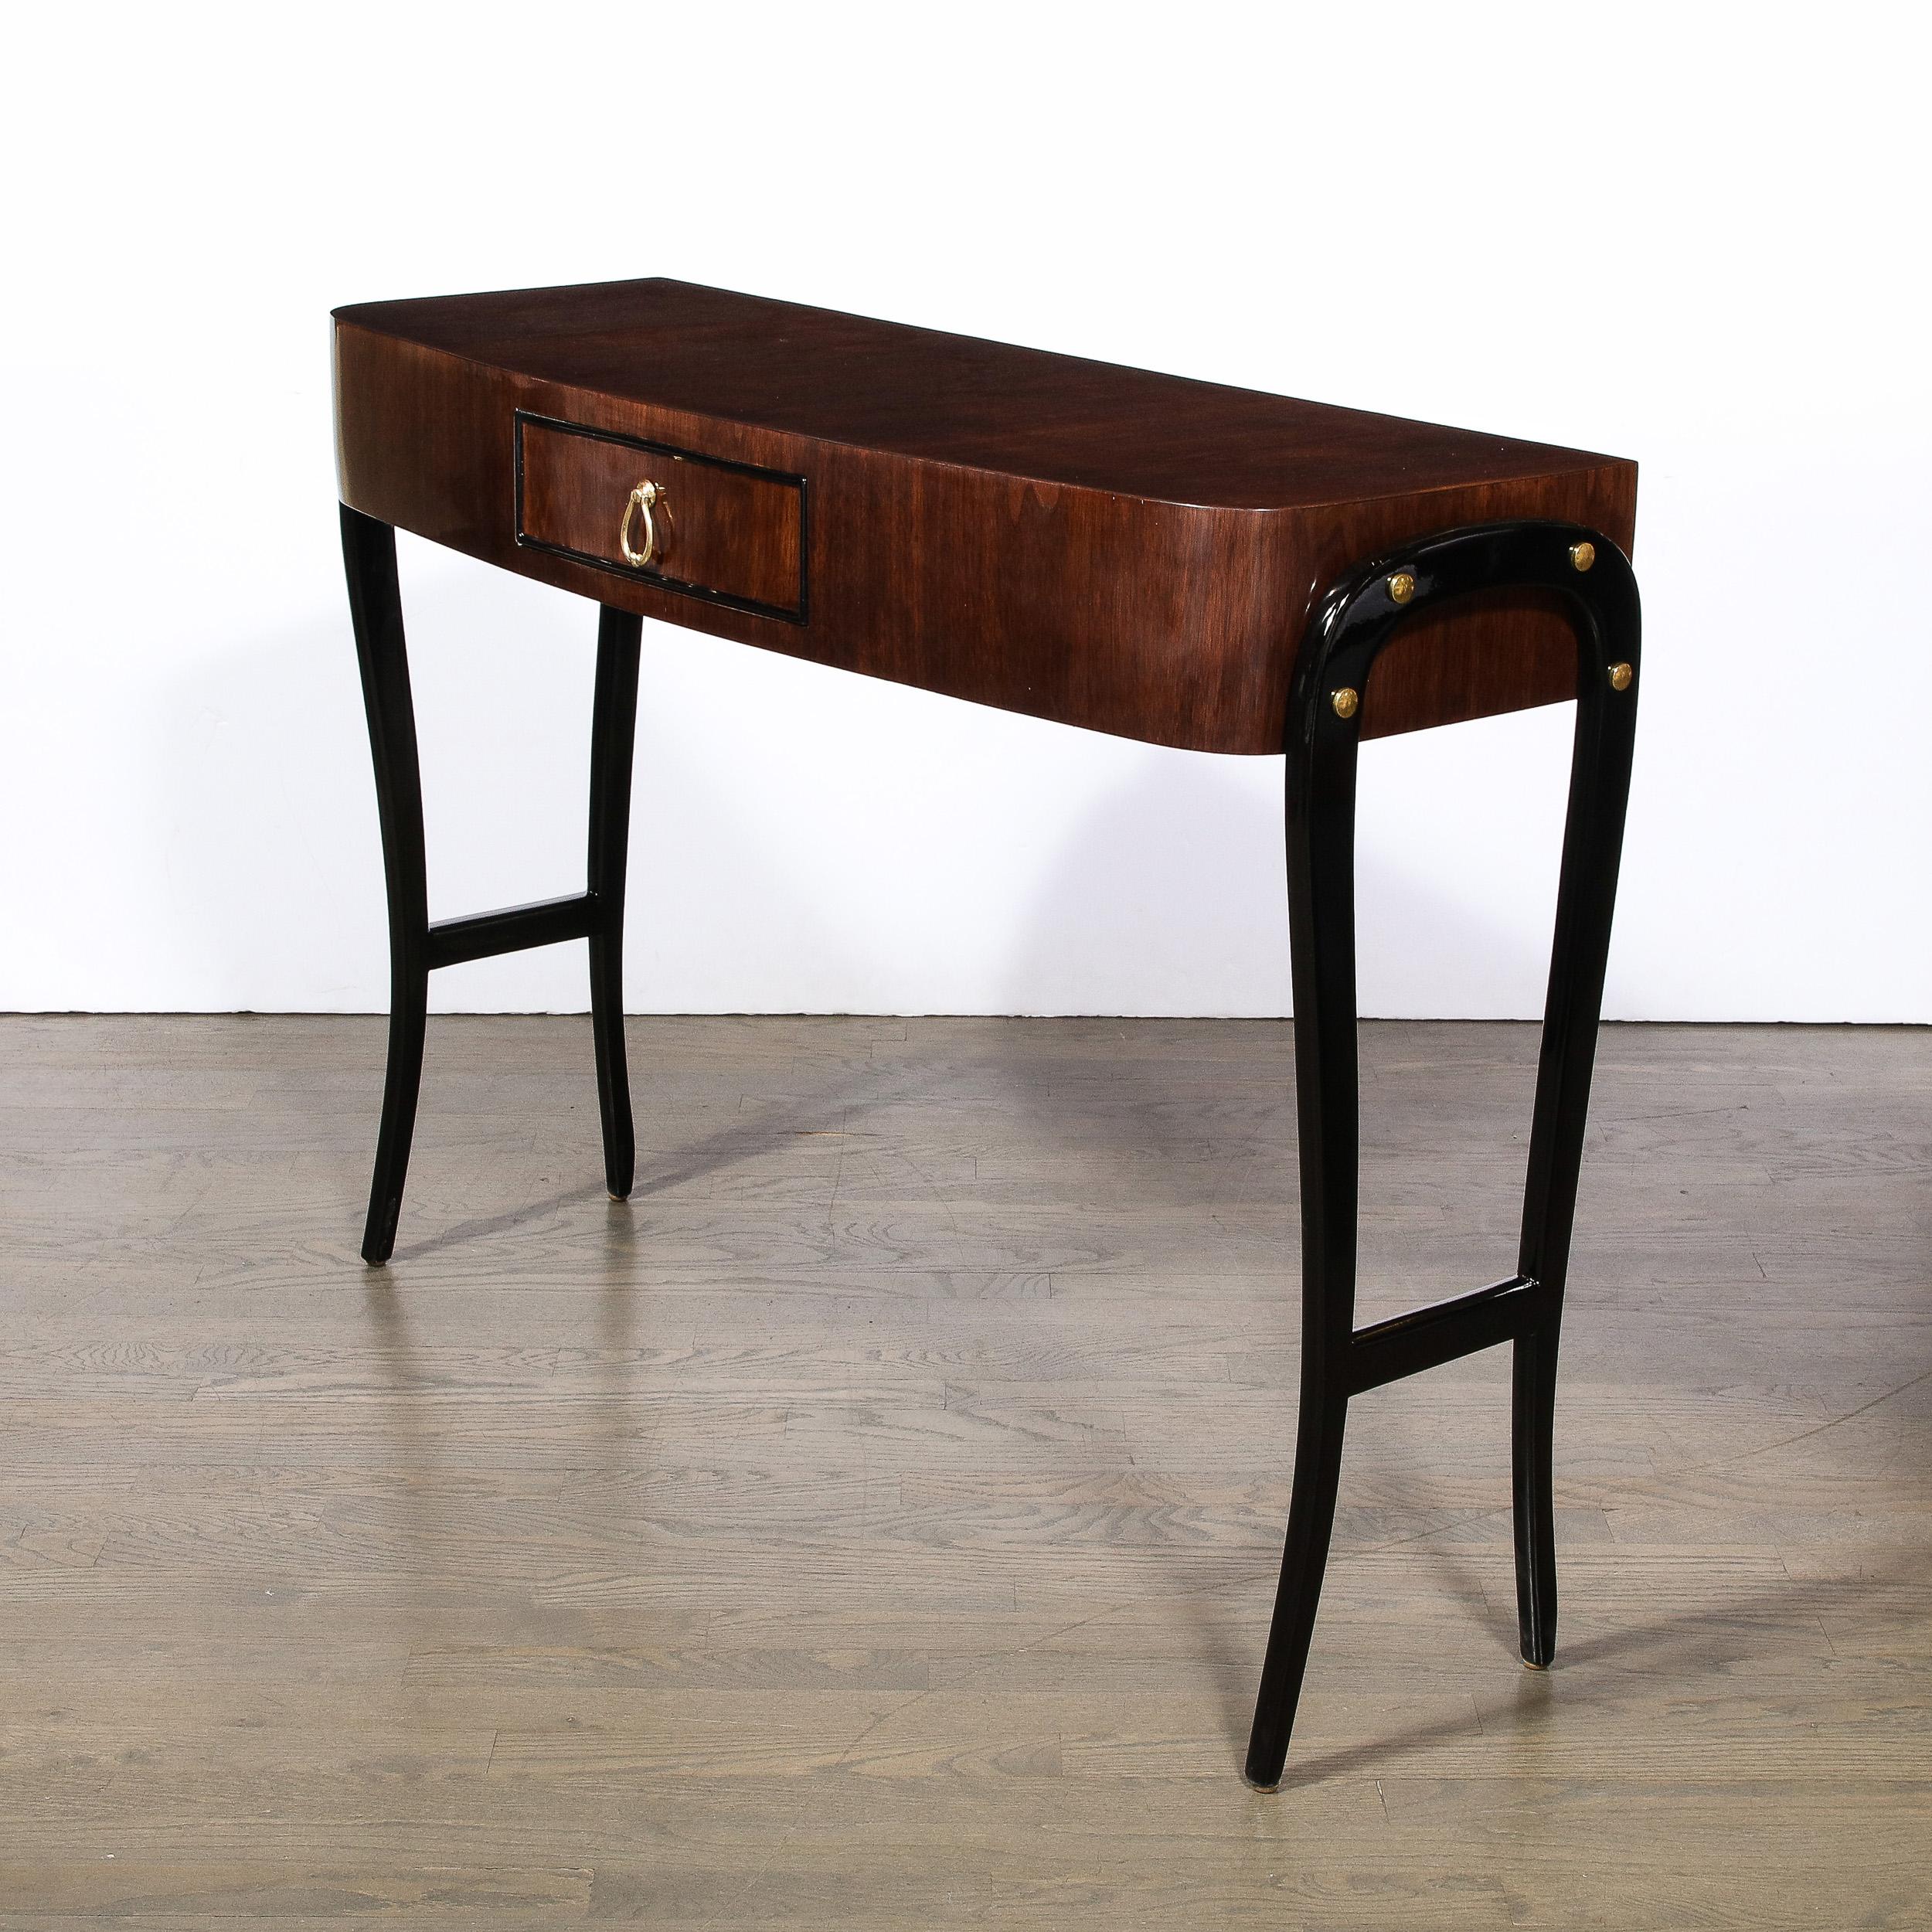 Mid-20th Century Mid-Century Modernist Walnut & Sculptural Black Lacquer Support Console Table